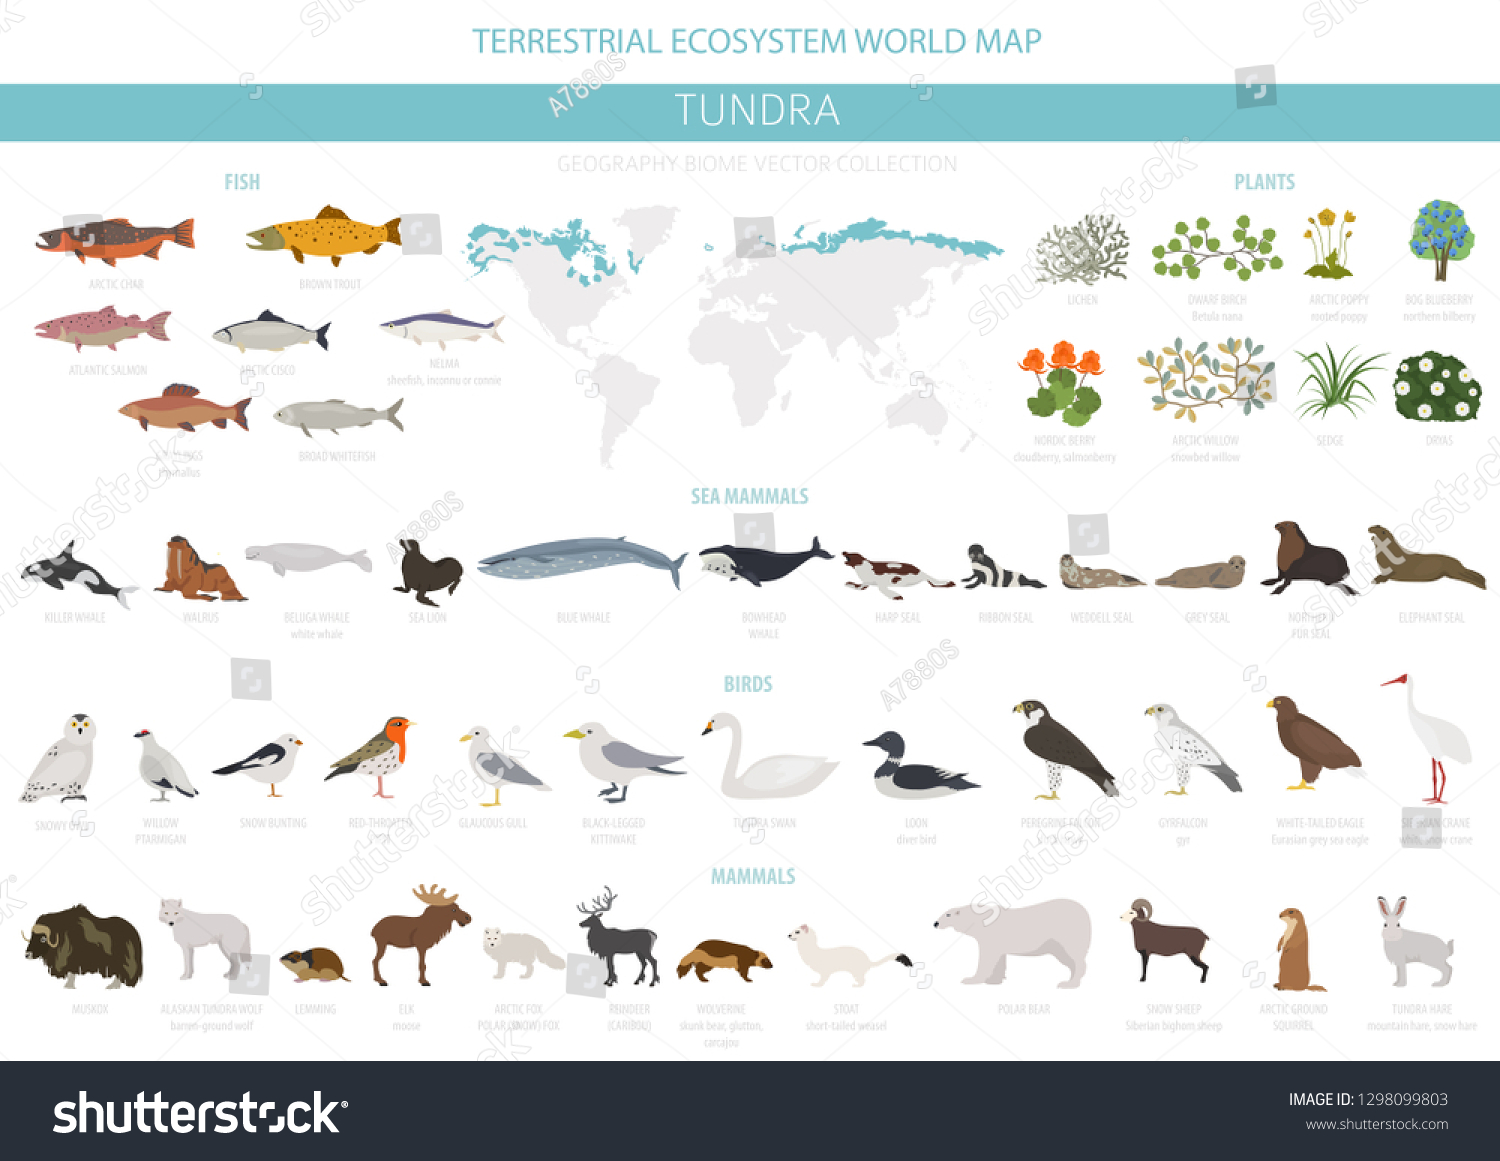 SVG of Tundra biome. Terrestrial ecosystem world map. Arctic animals, birds, fish and plants infographic design. Vector illustration svg